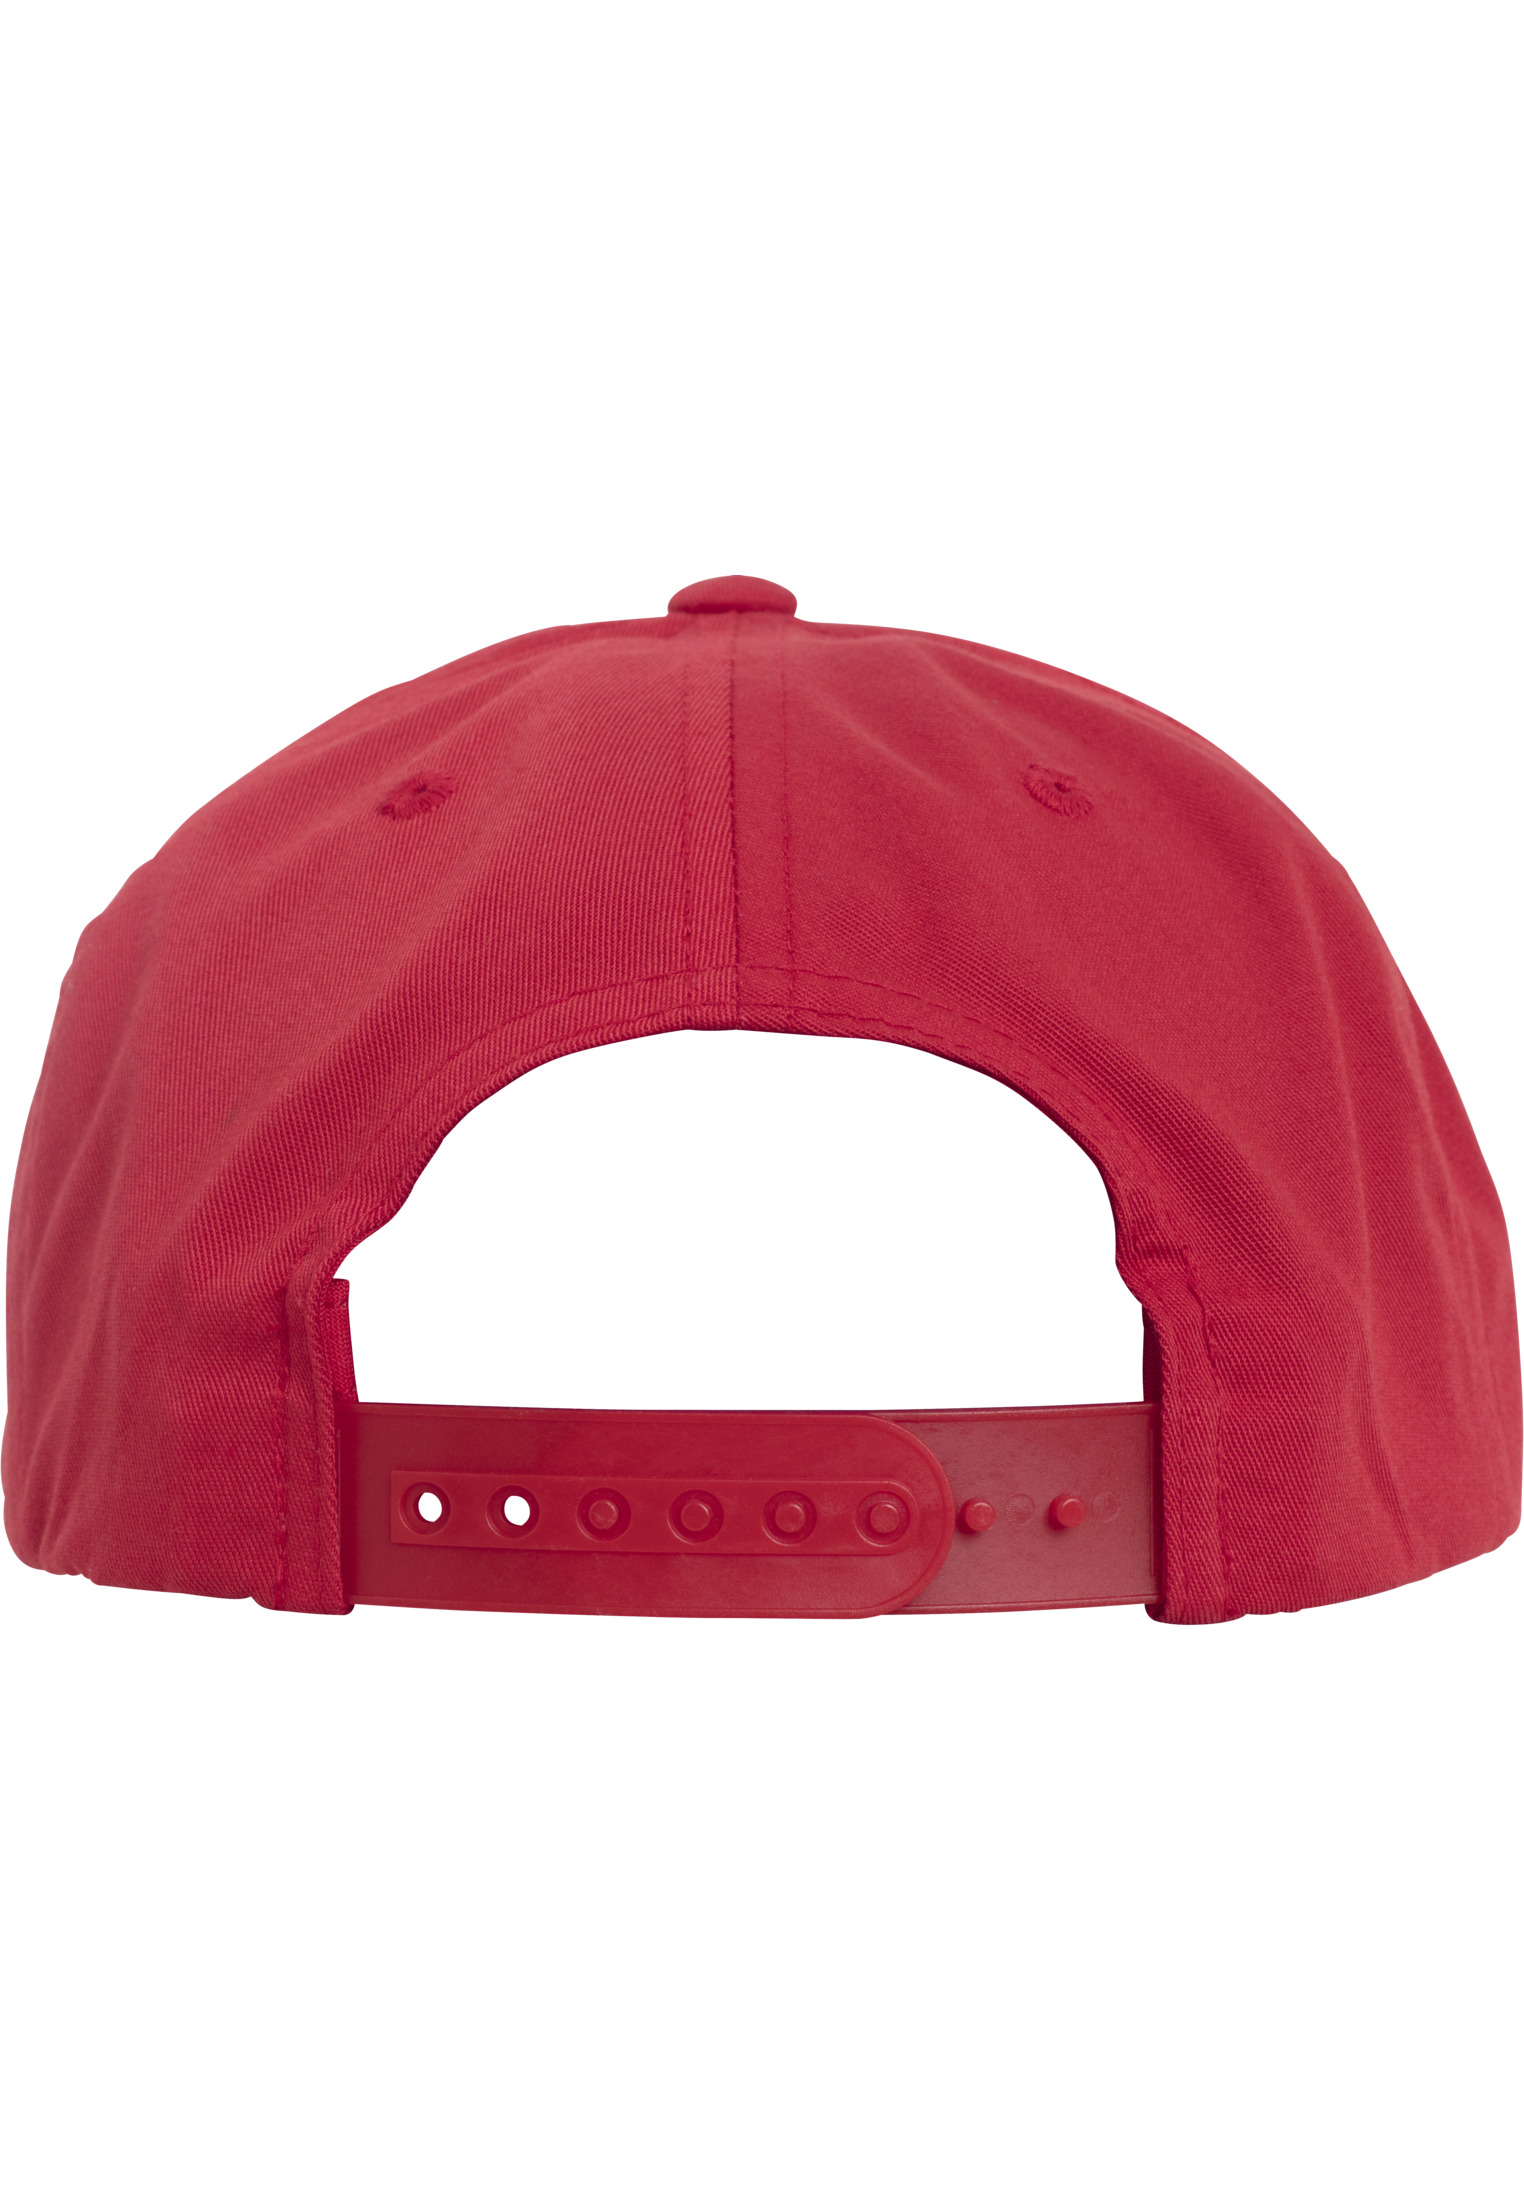 Kids Pro-Style Twill Snapback Youth Cap in Farbe red